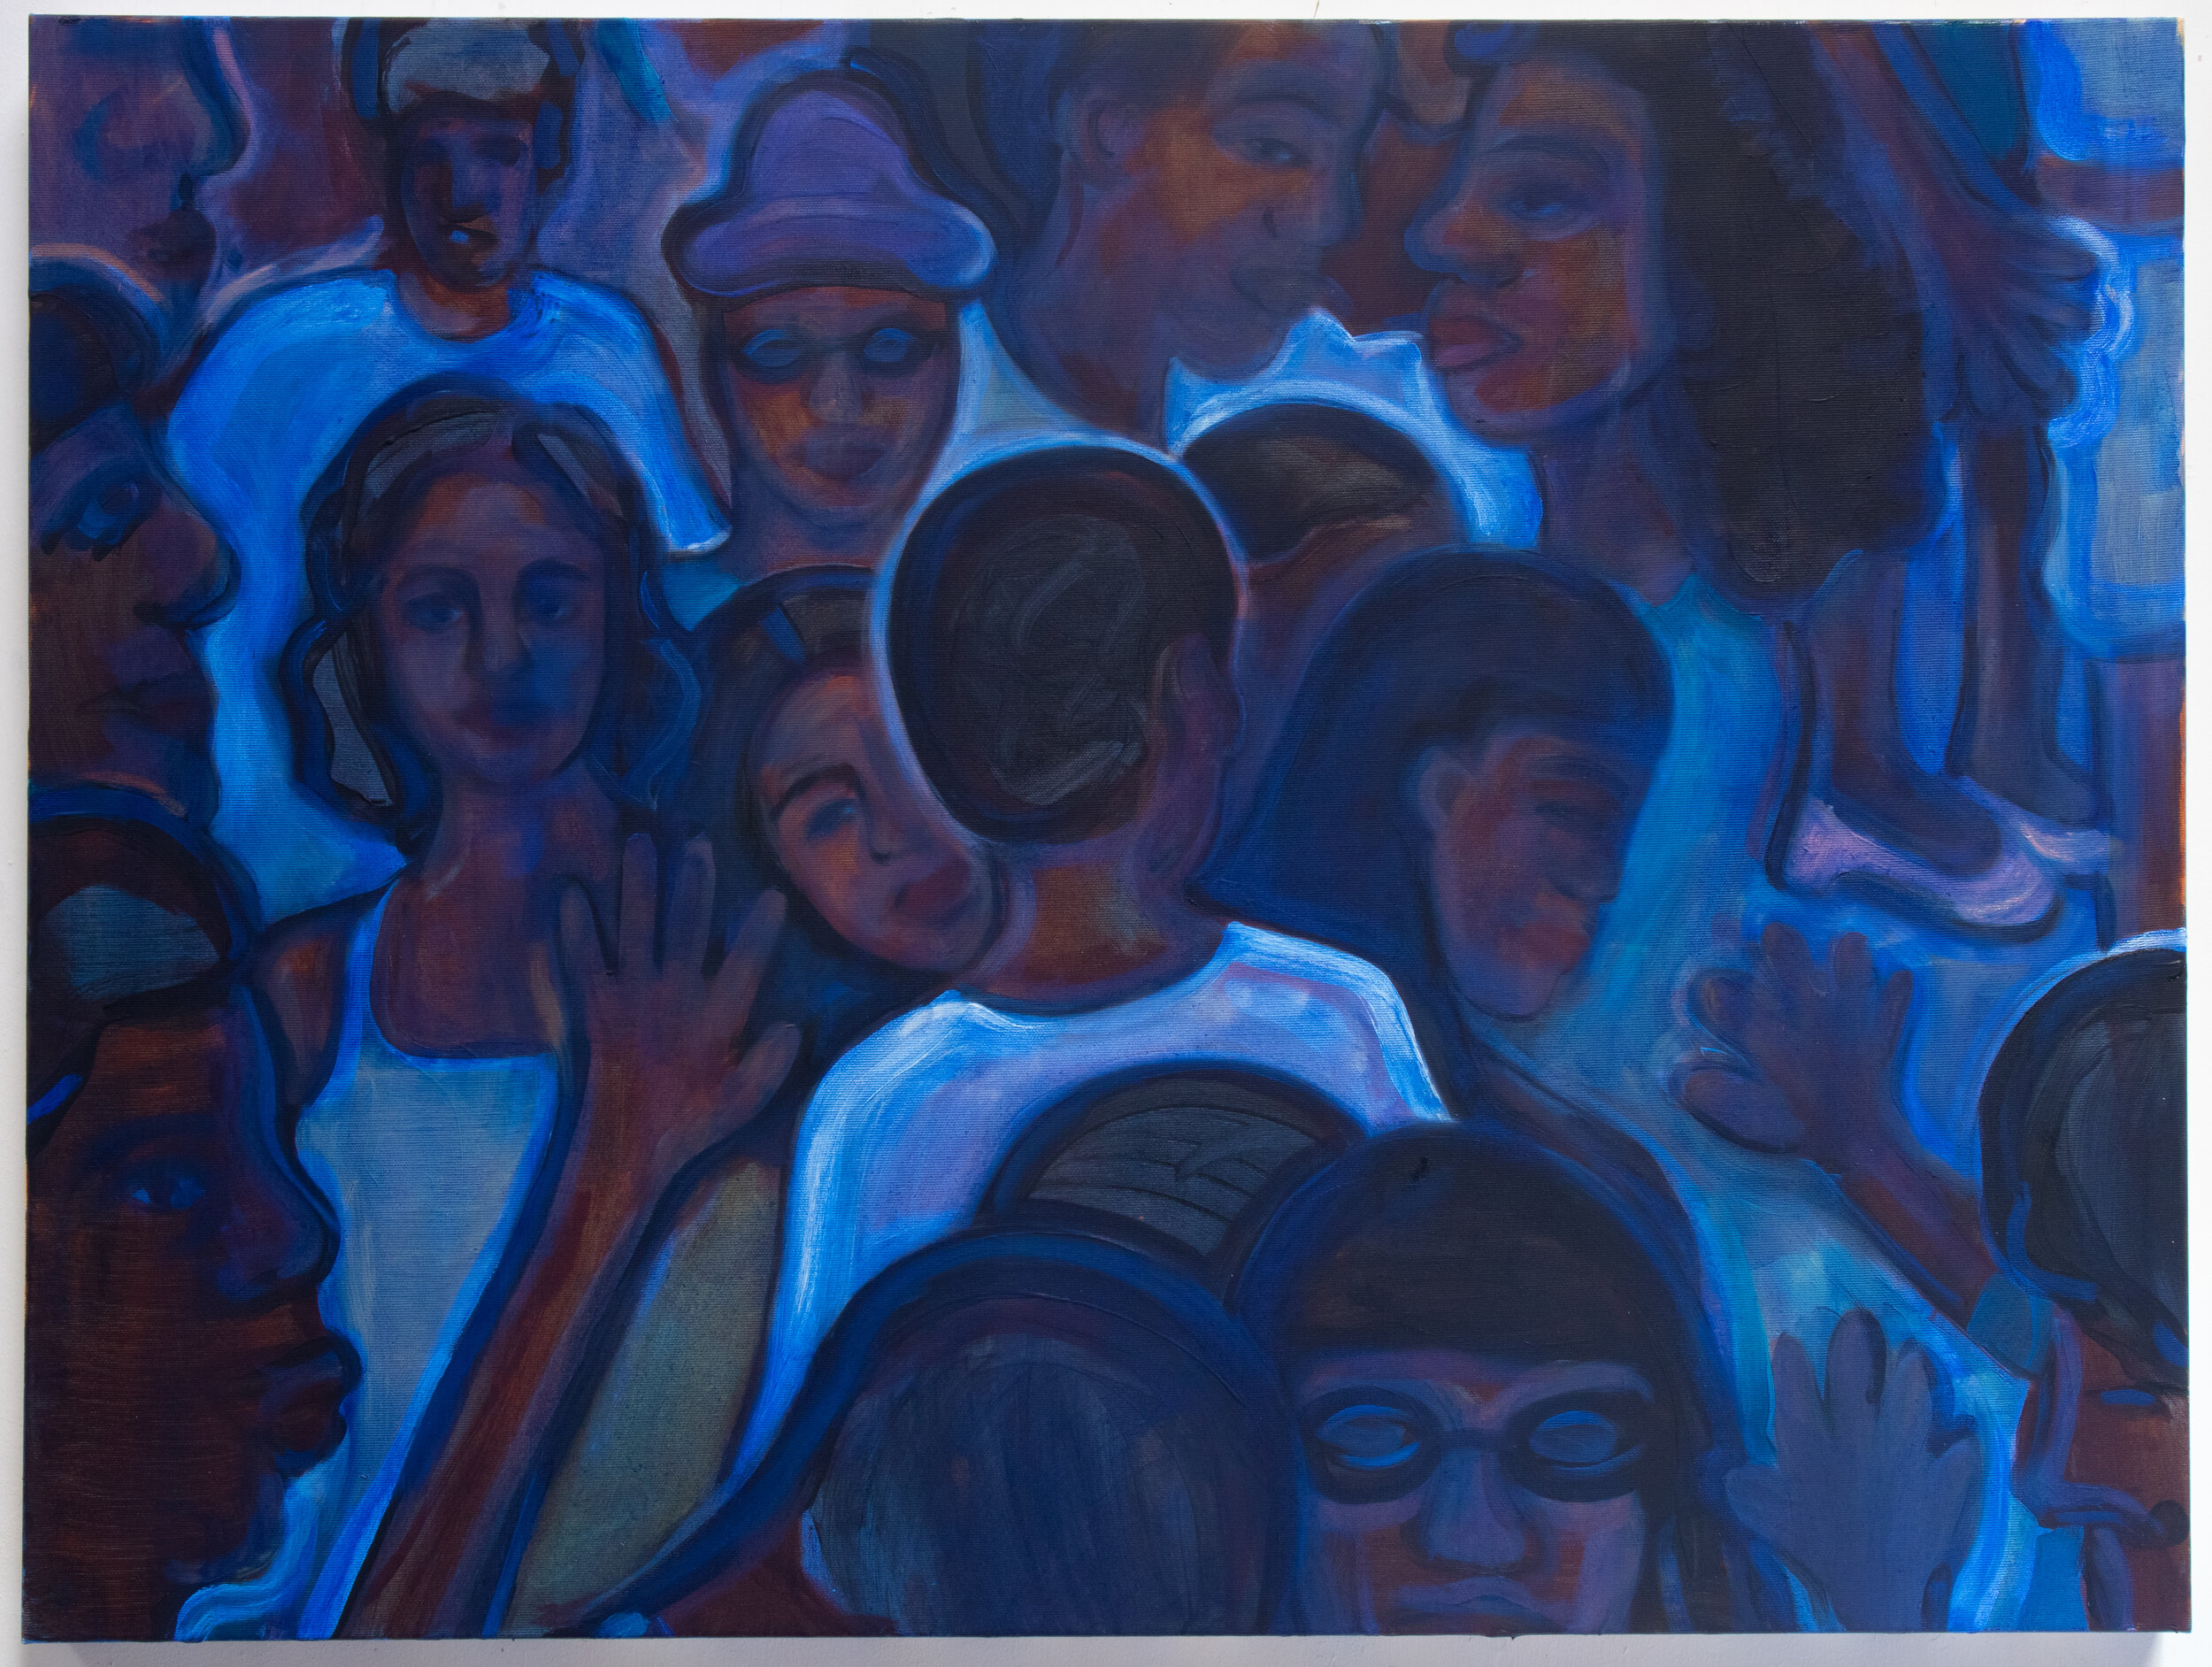   Untitled (Blues) , 2020 Oil on canvas 30 x 40 inches 